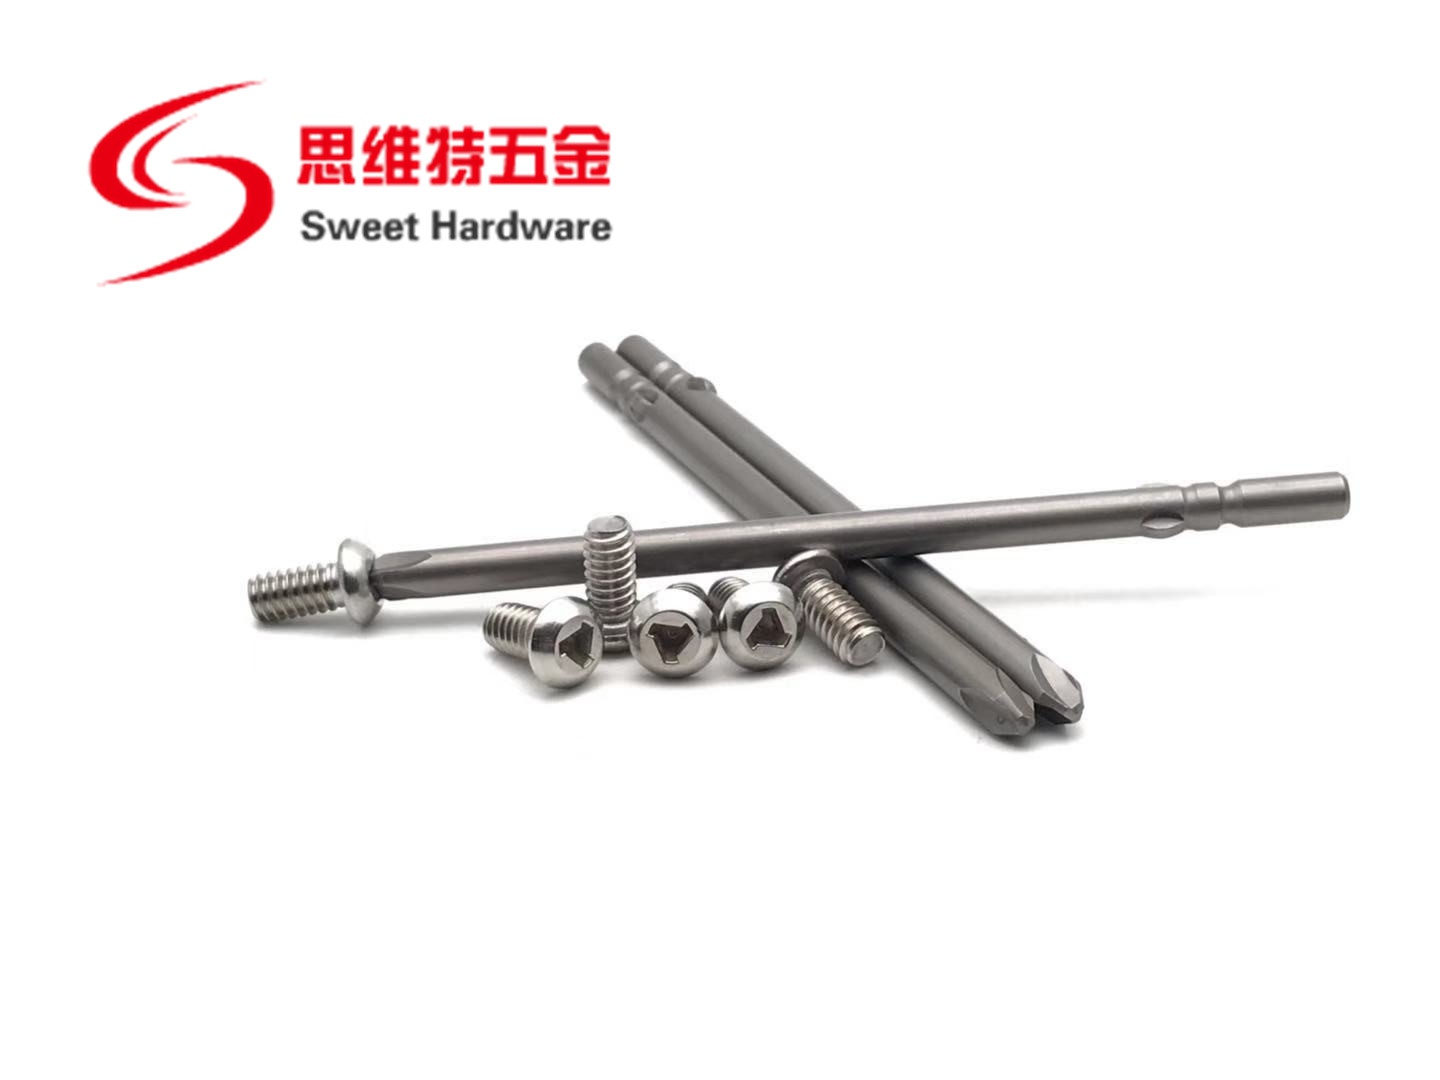 SS304 stainless steel TRI WING screw custimized available